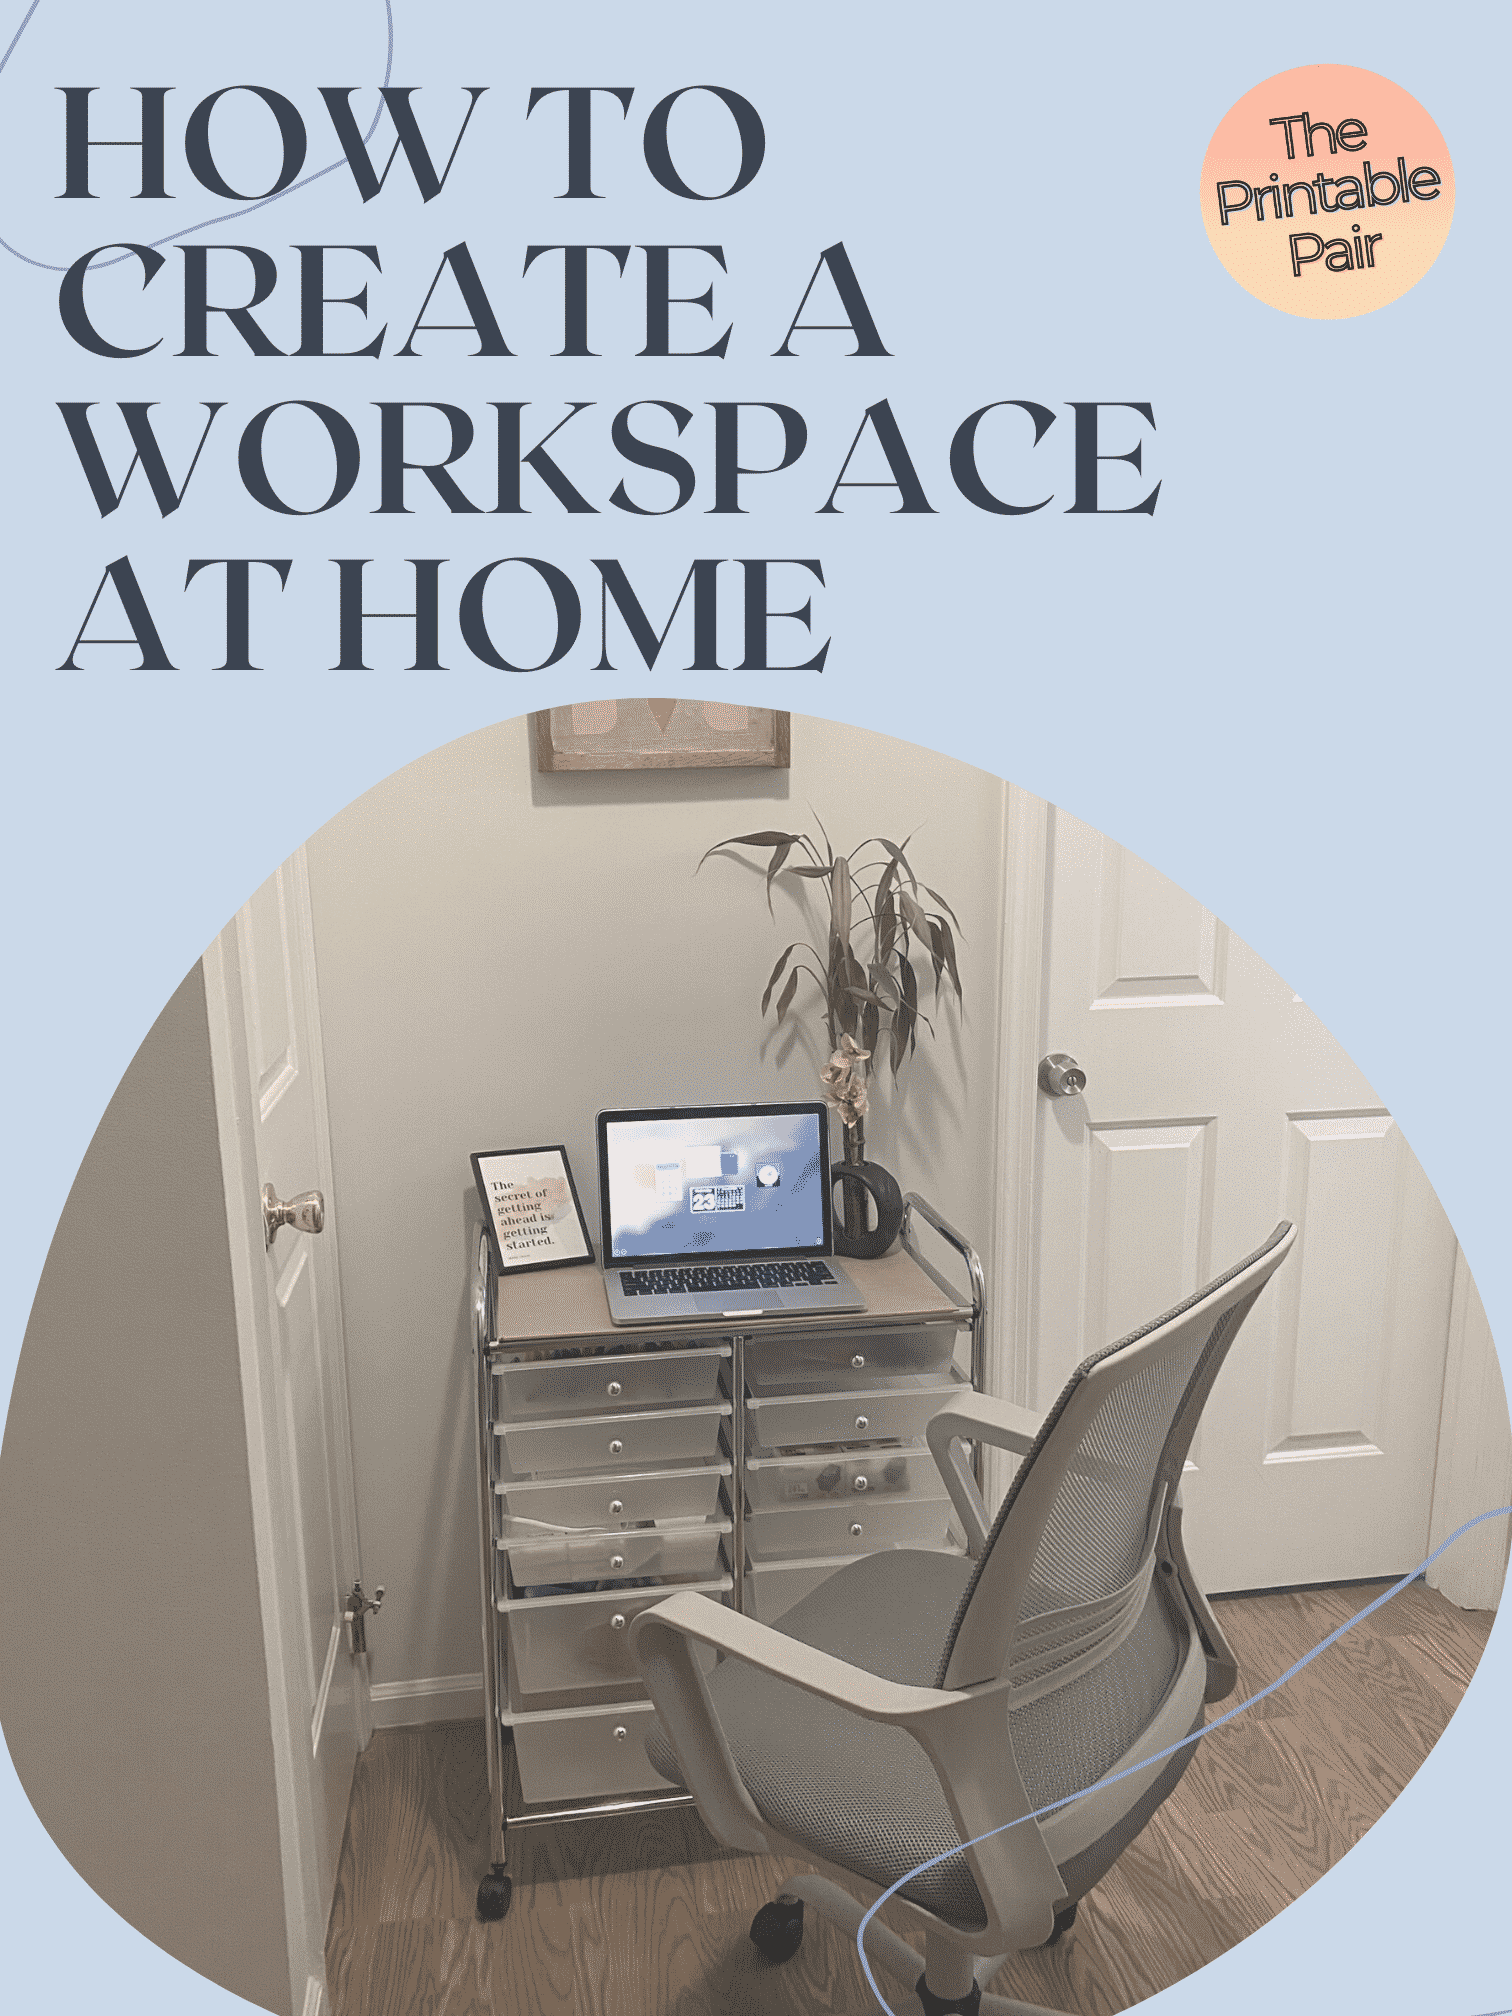 How to Create a Workspace at Home